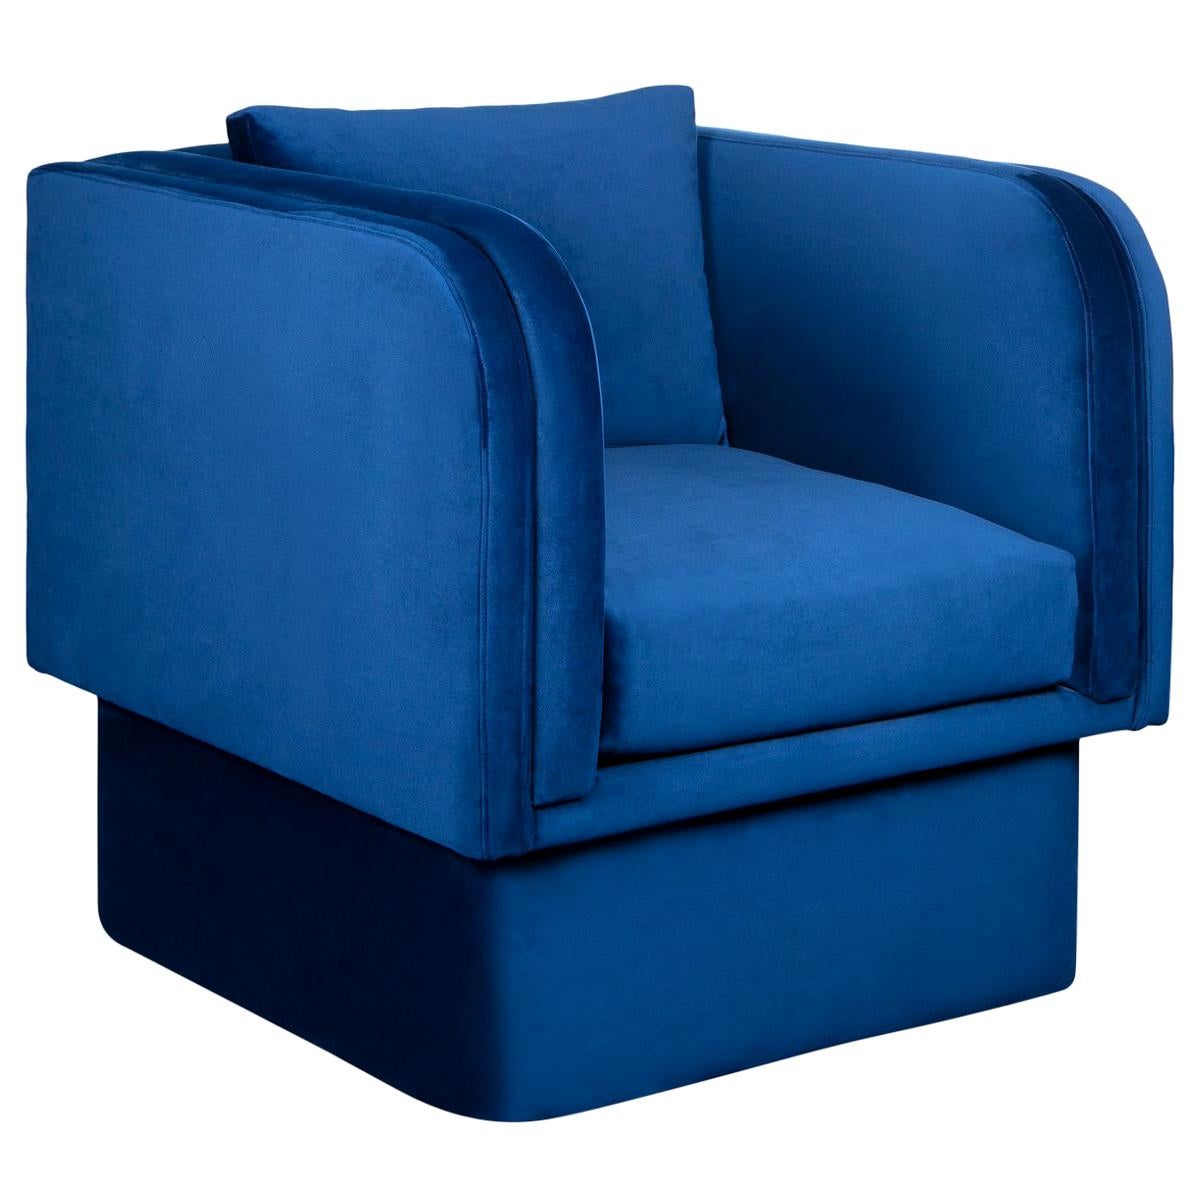 Cobalt Blue Velvet Occasional Chair with Down-Filled Cushion & Soft Back Pillow For Sale